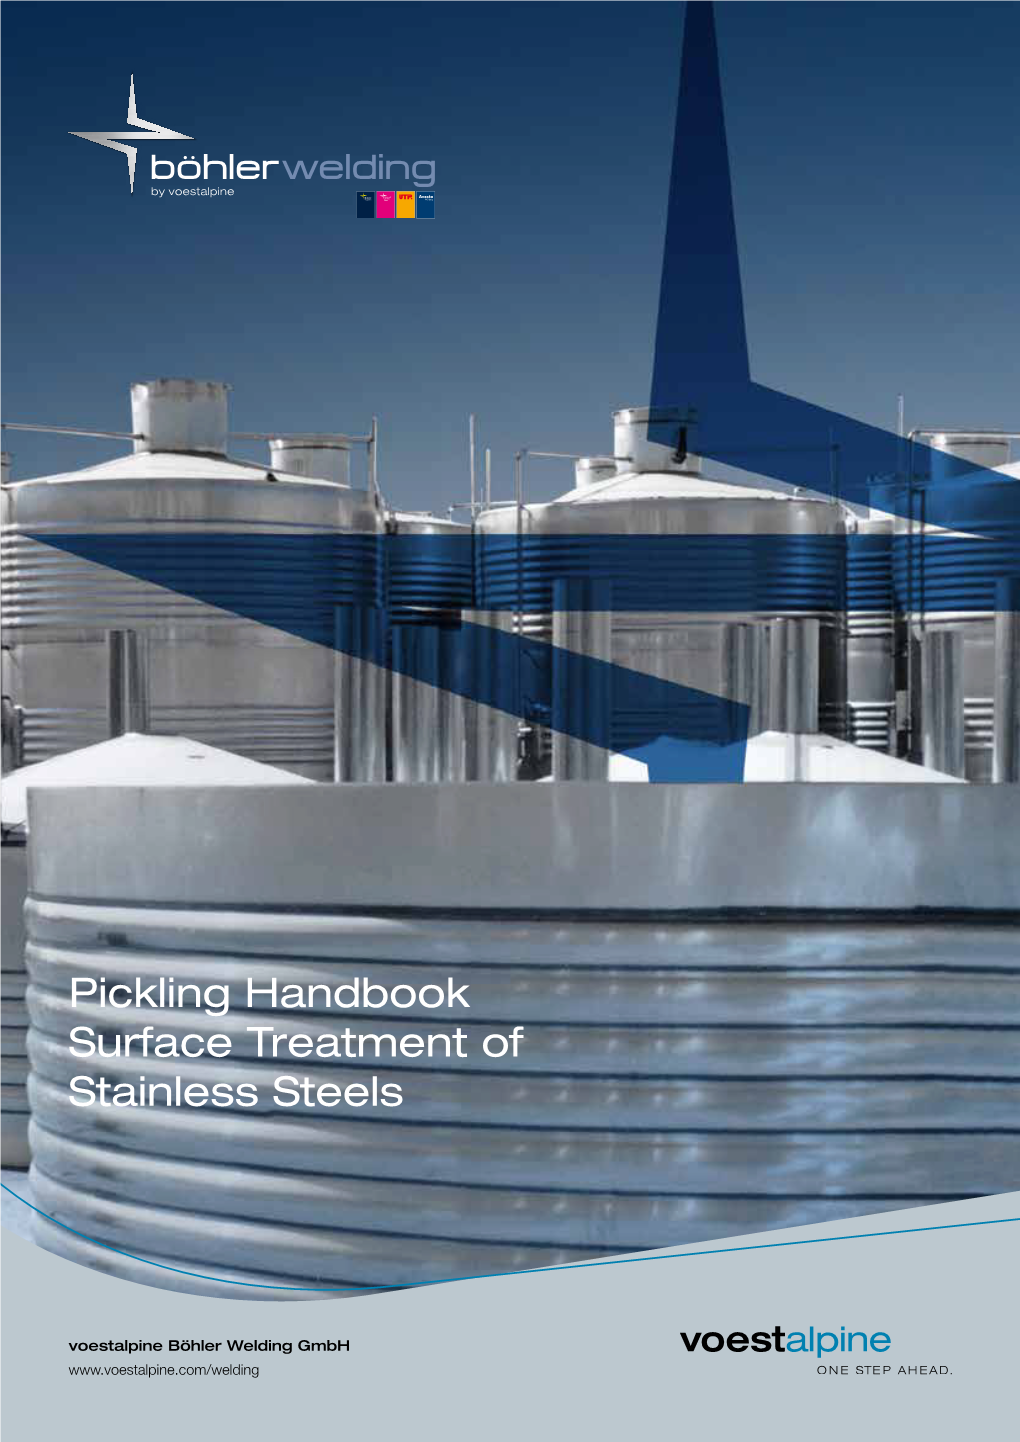 Pickling Handbook Surface Treatment of Stainless Steels